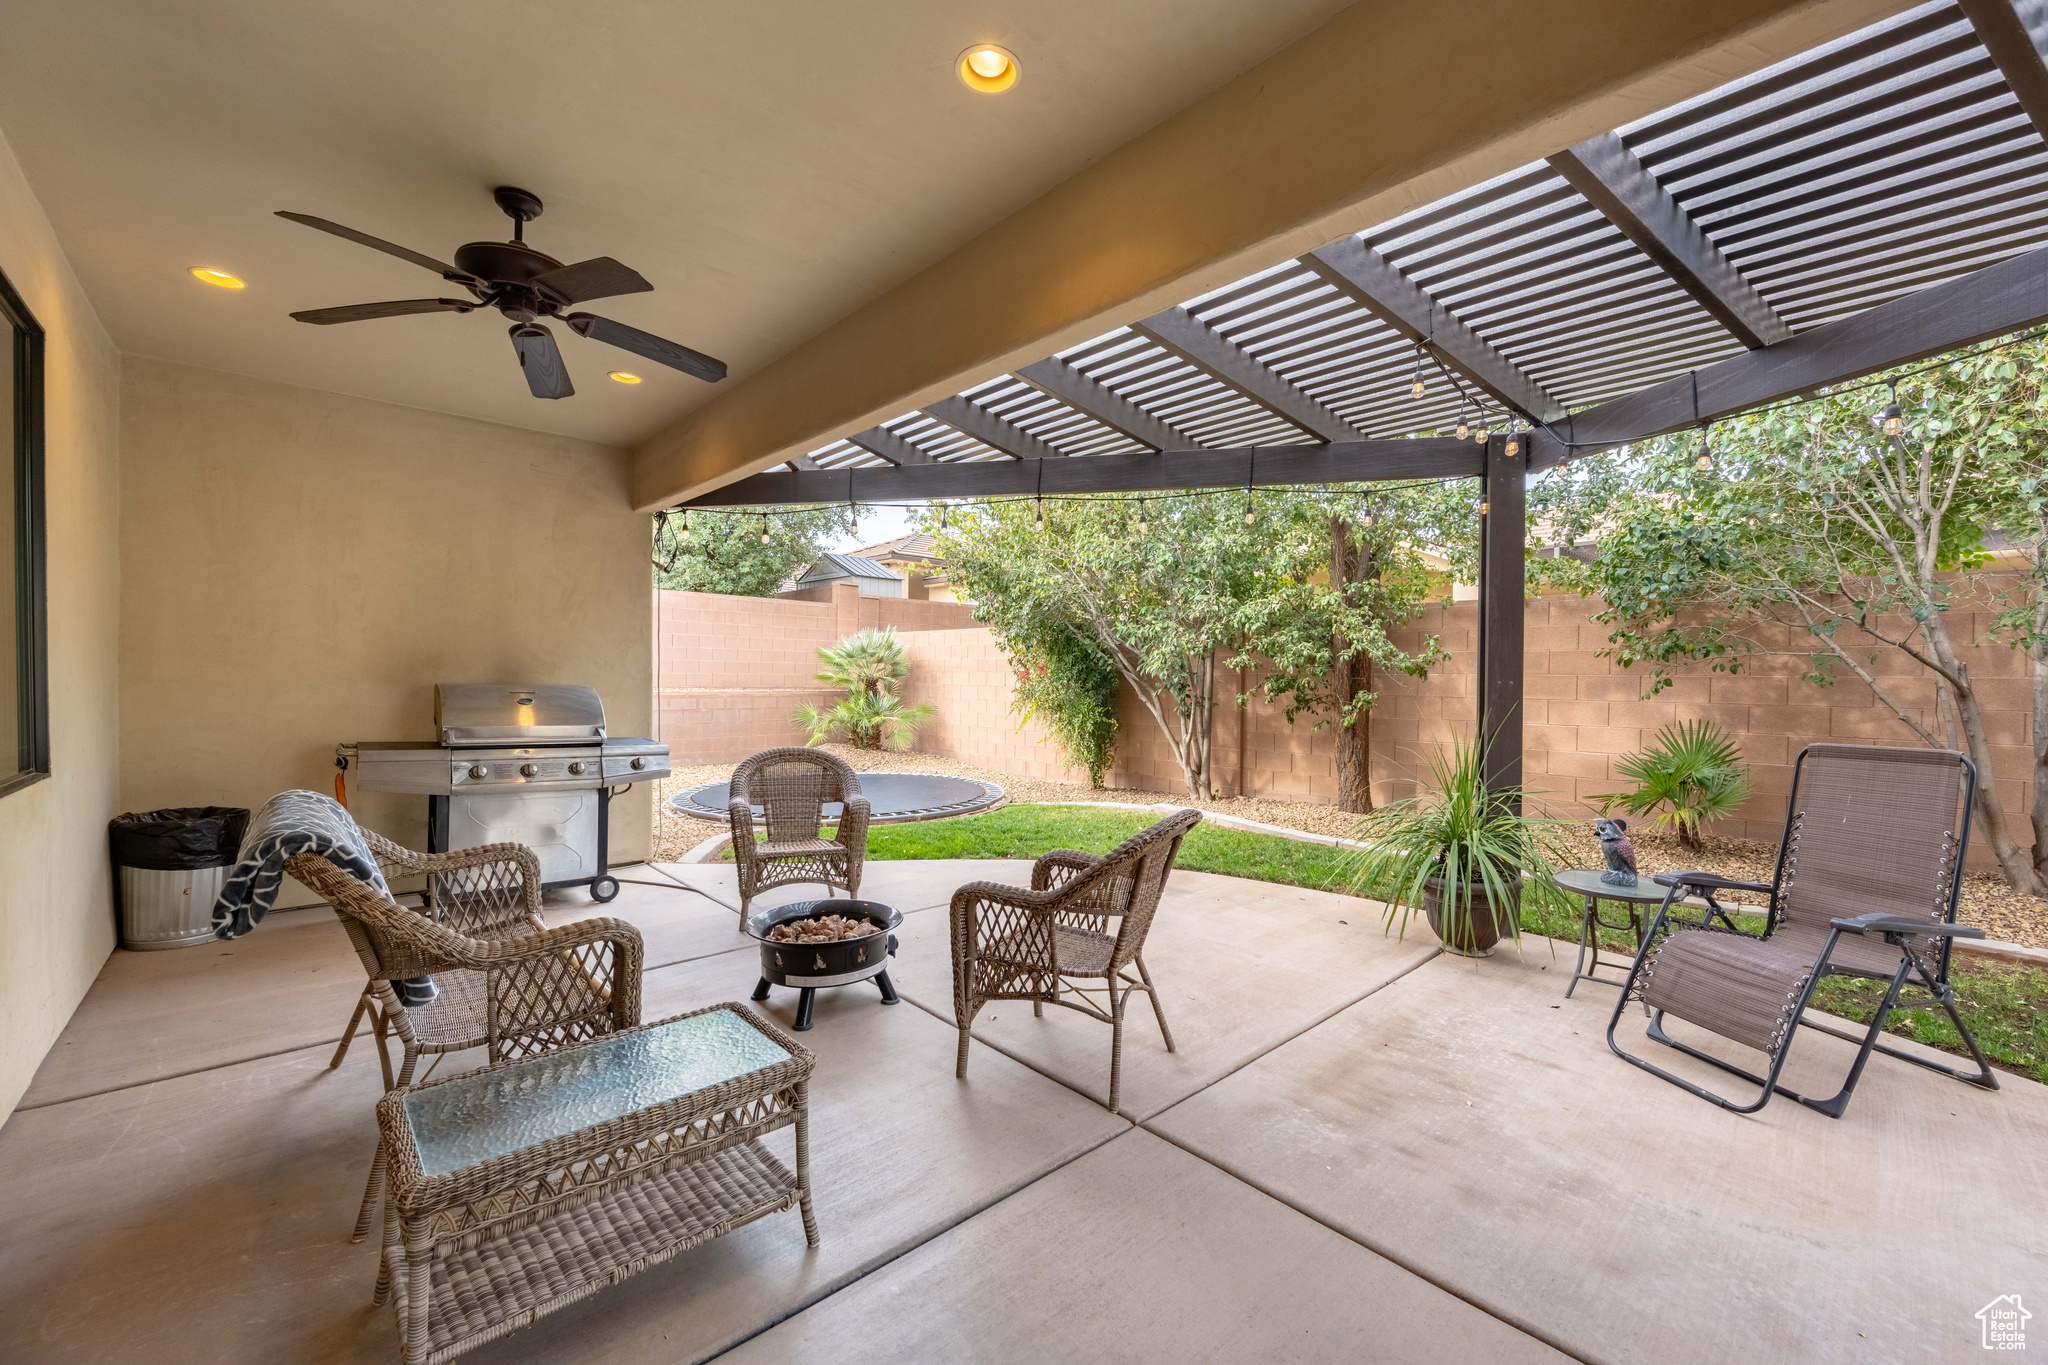 View of patio / terrace featuring area for grilling, a pergola, and ceiling fan